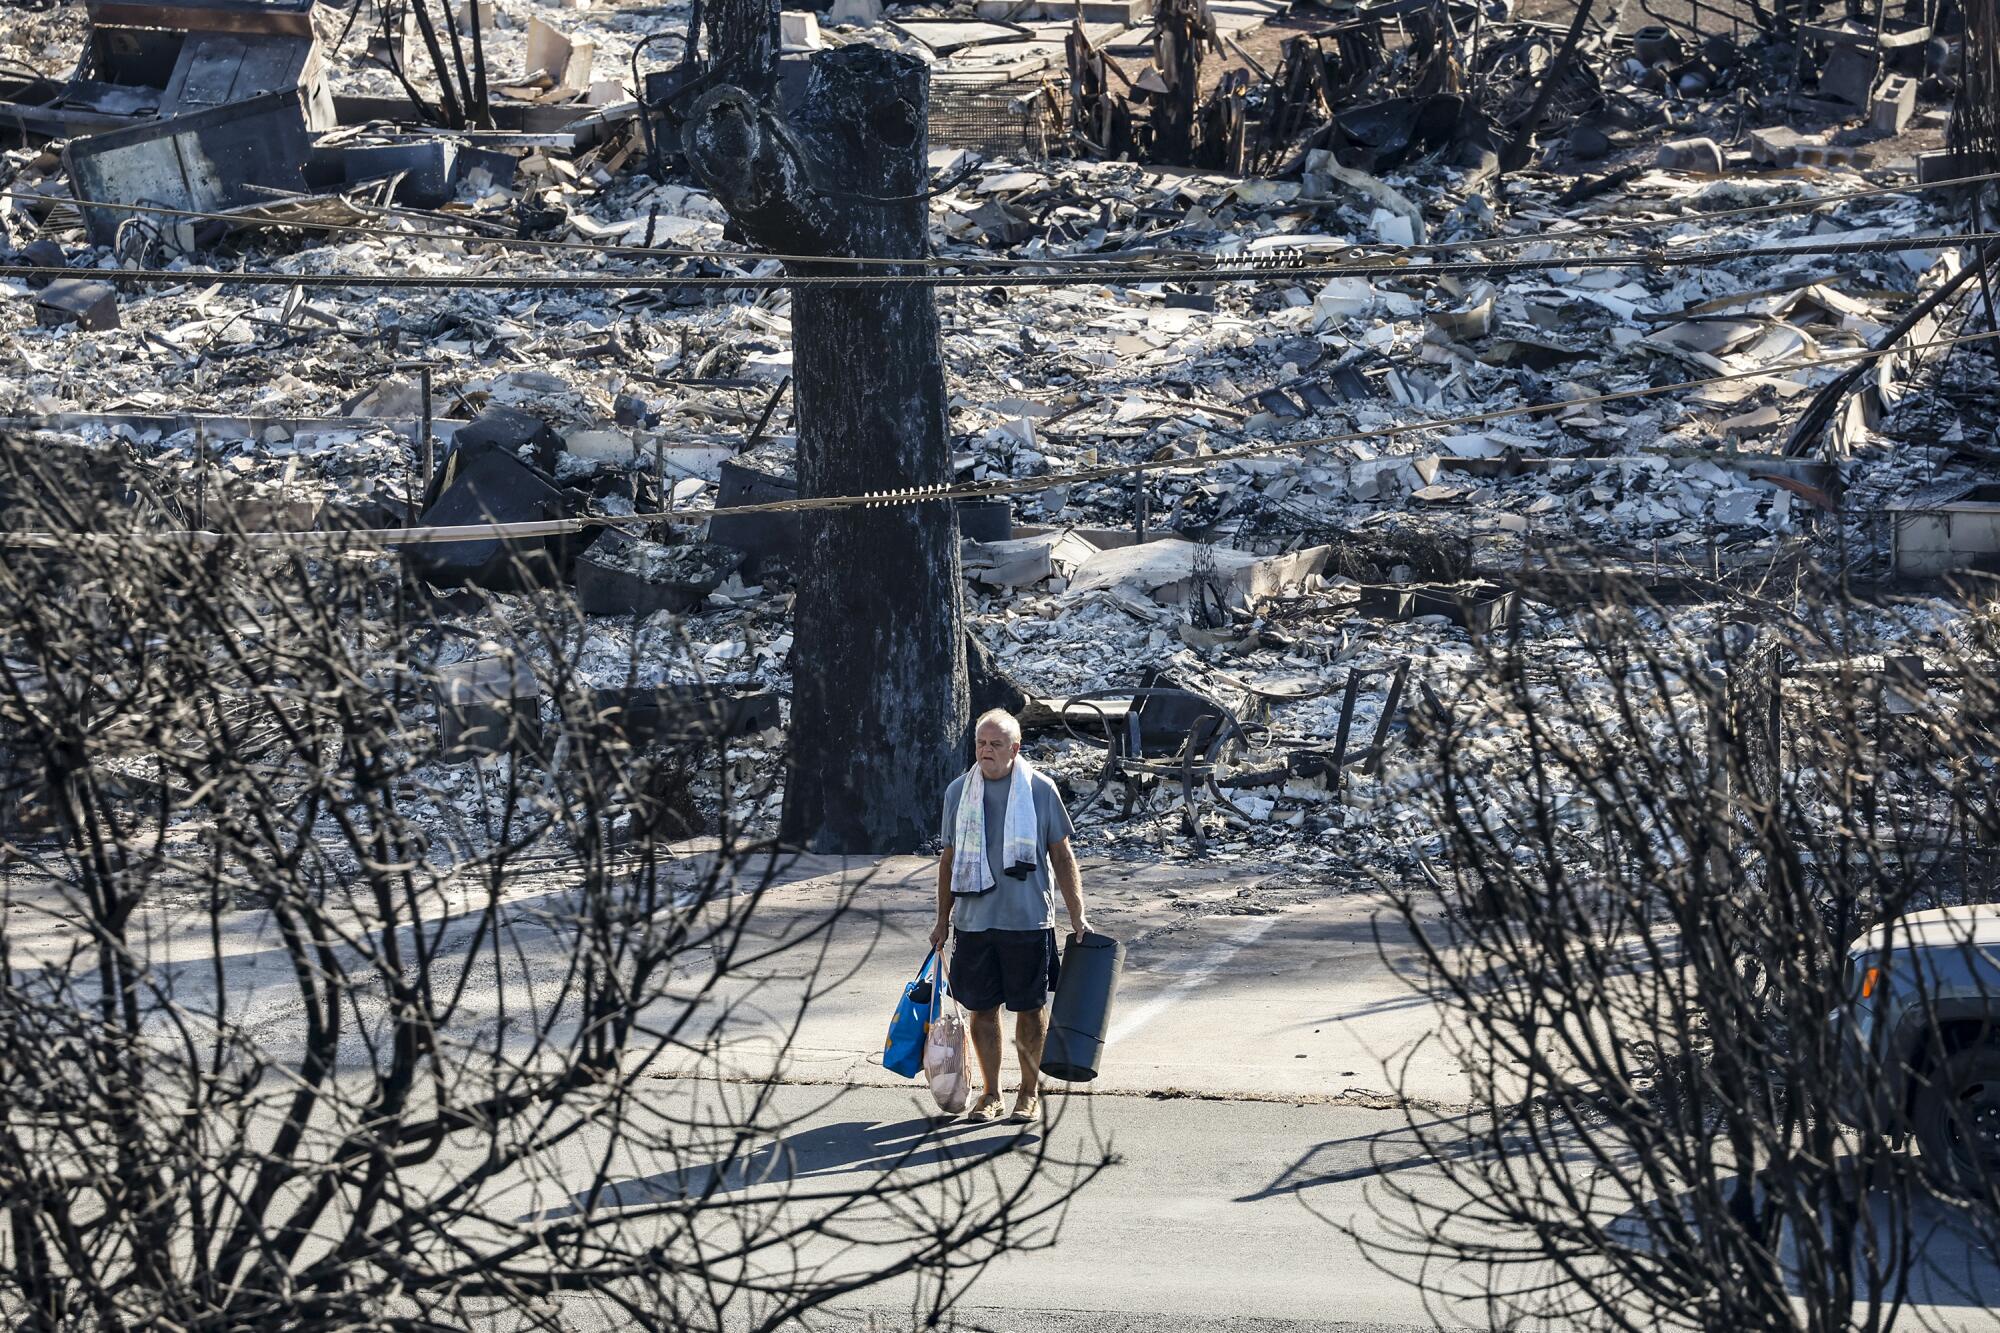 A man holding bags in each hand stands on a street through a burned neighborhood.